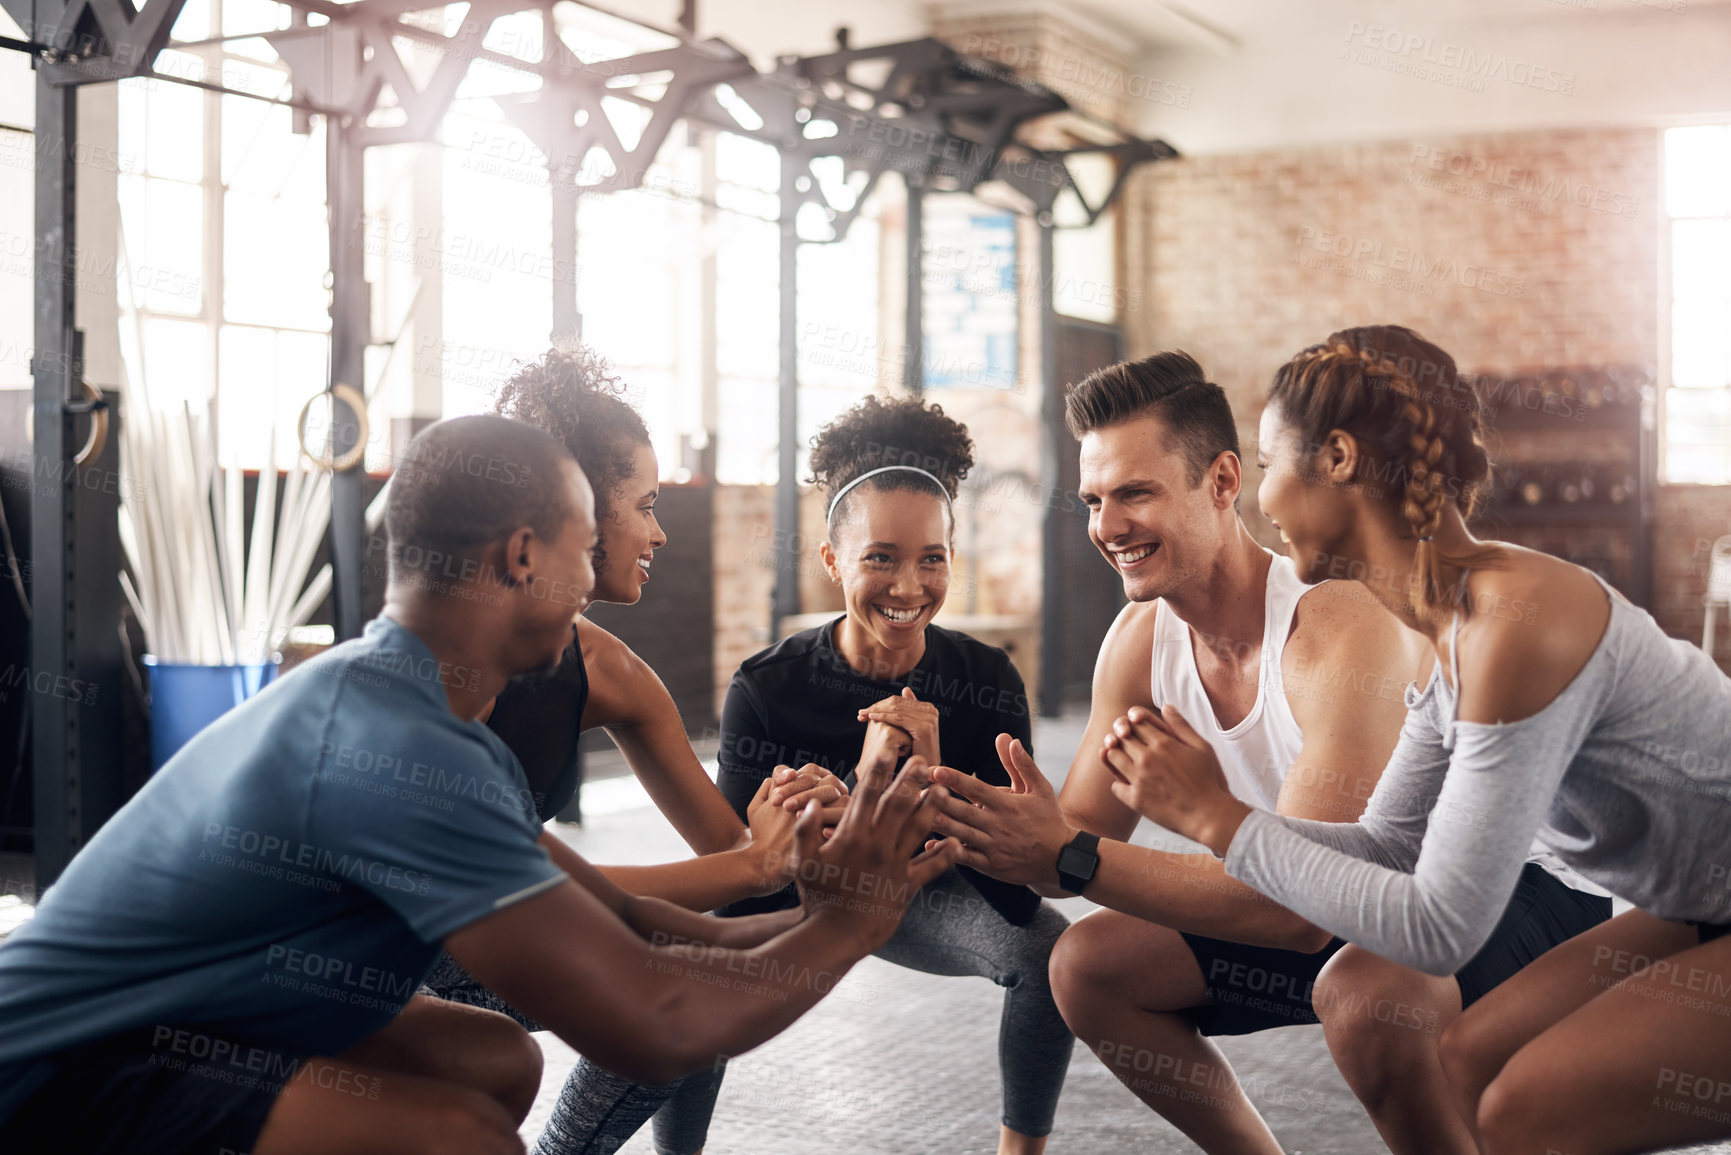 Buy stock photo Shot of a group of young people doing squats together during their workout in a gym